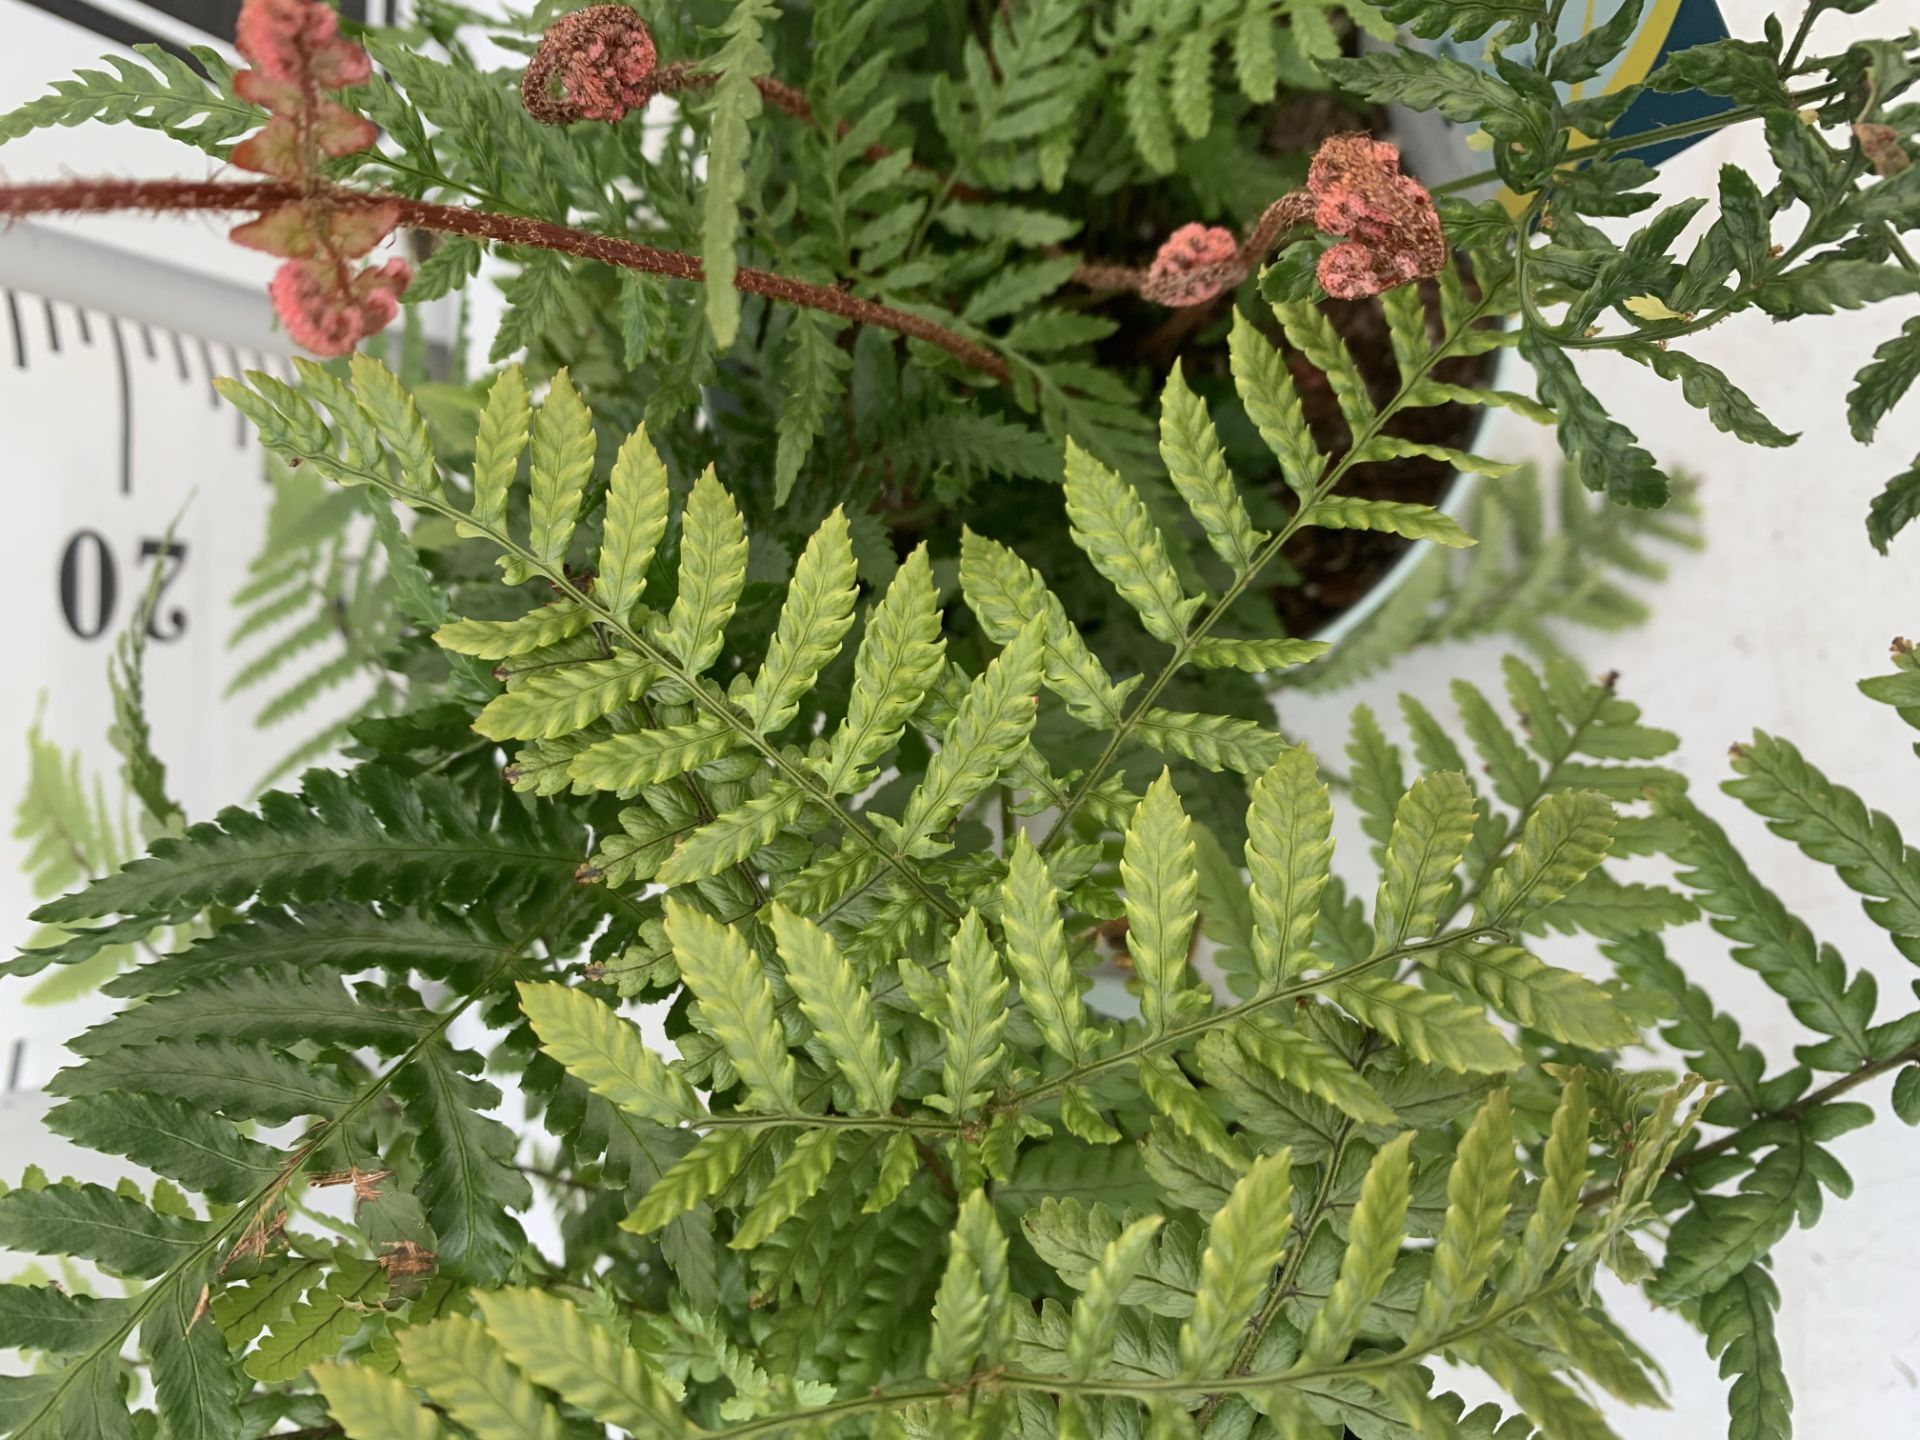 TWO FERNS 'DRYOPTERIS ERYTHROSORA' AND 'DRYOPTERIS AFFINIS' IN 2 LTR POTS APPROX 40CM IN HEIGHT PLUS - Image 5 of 8